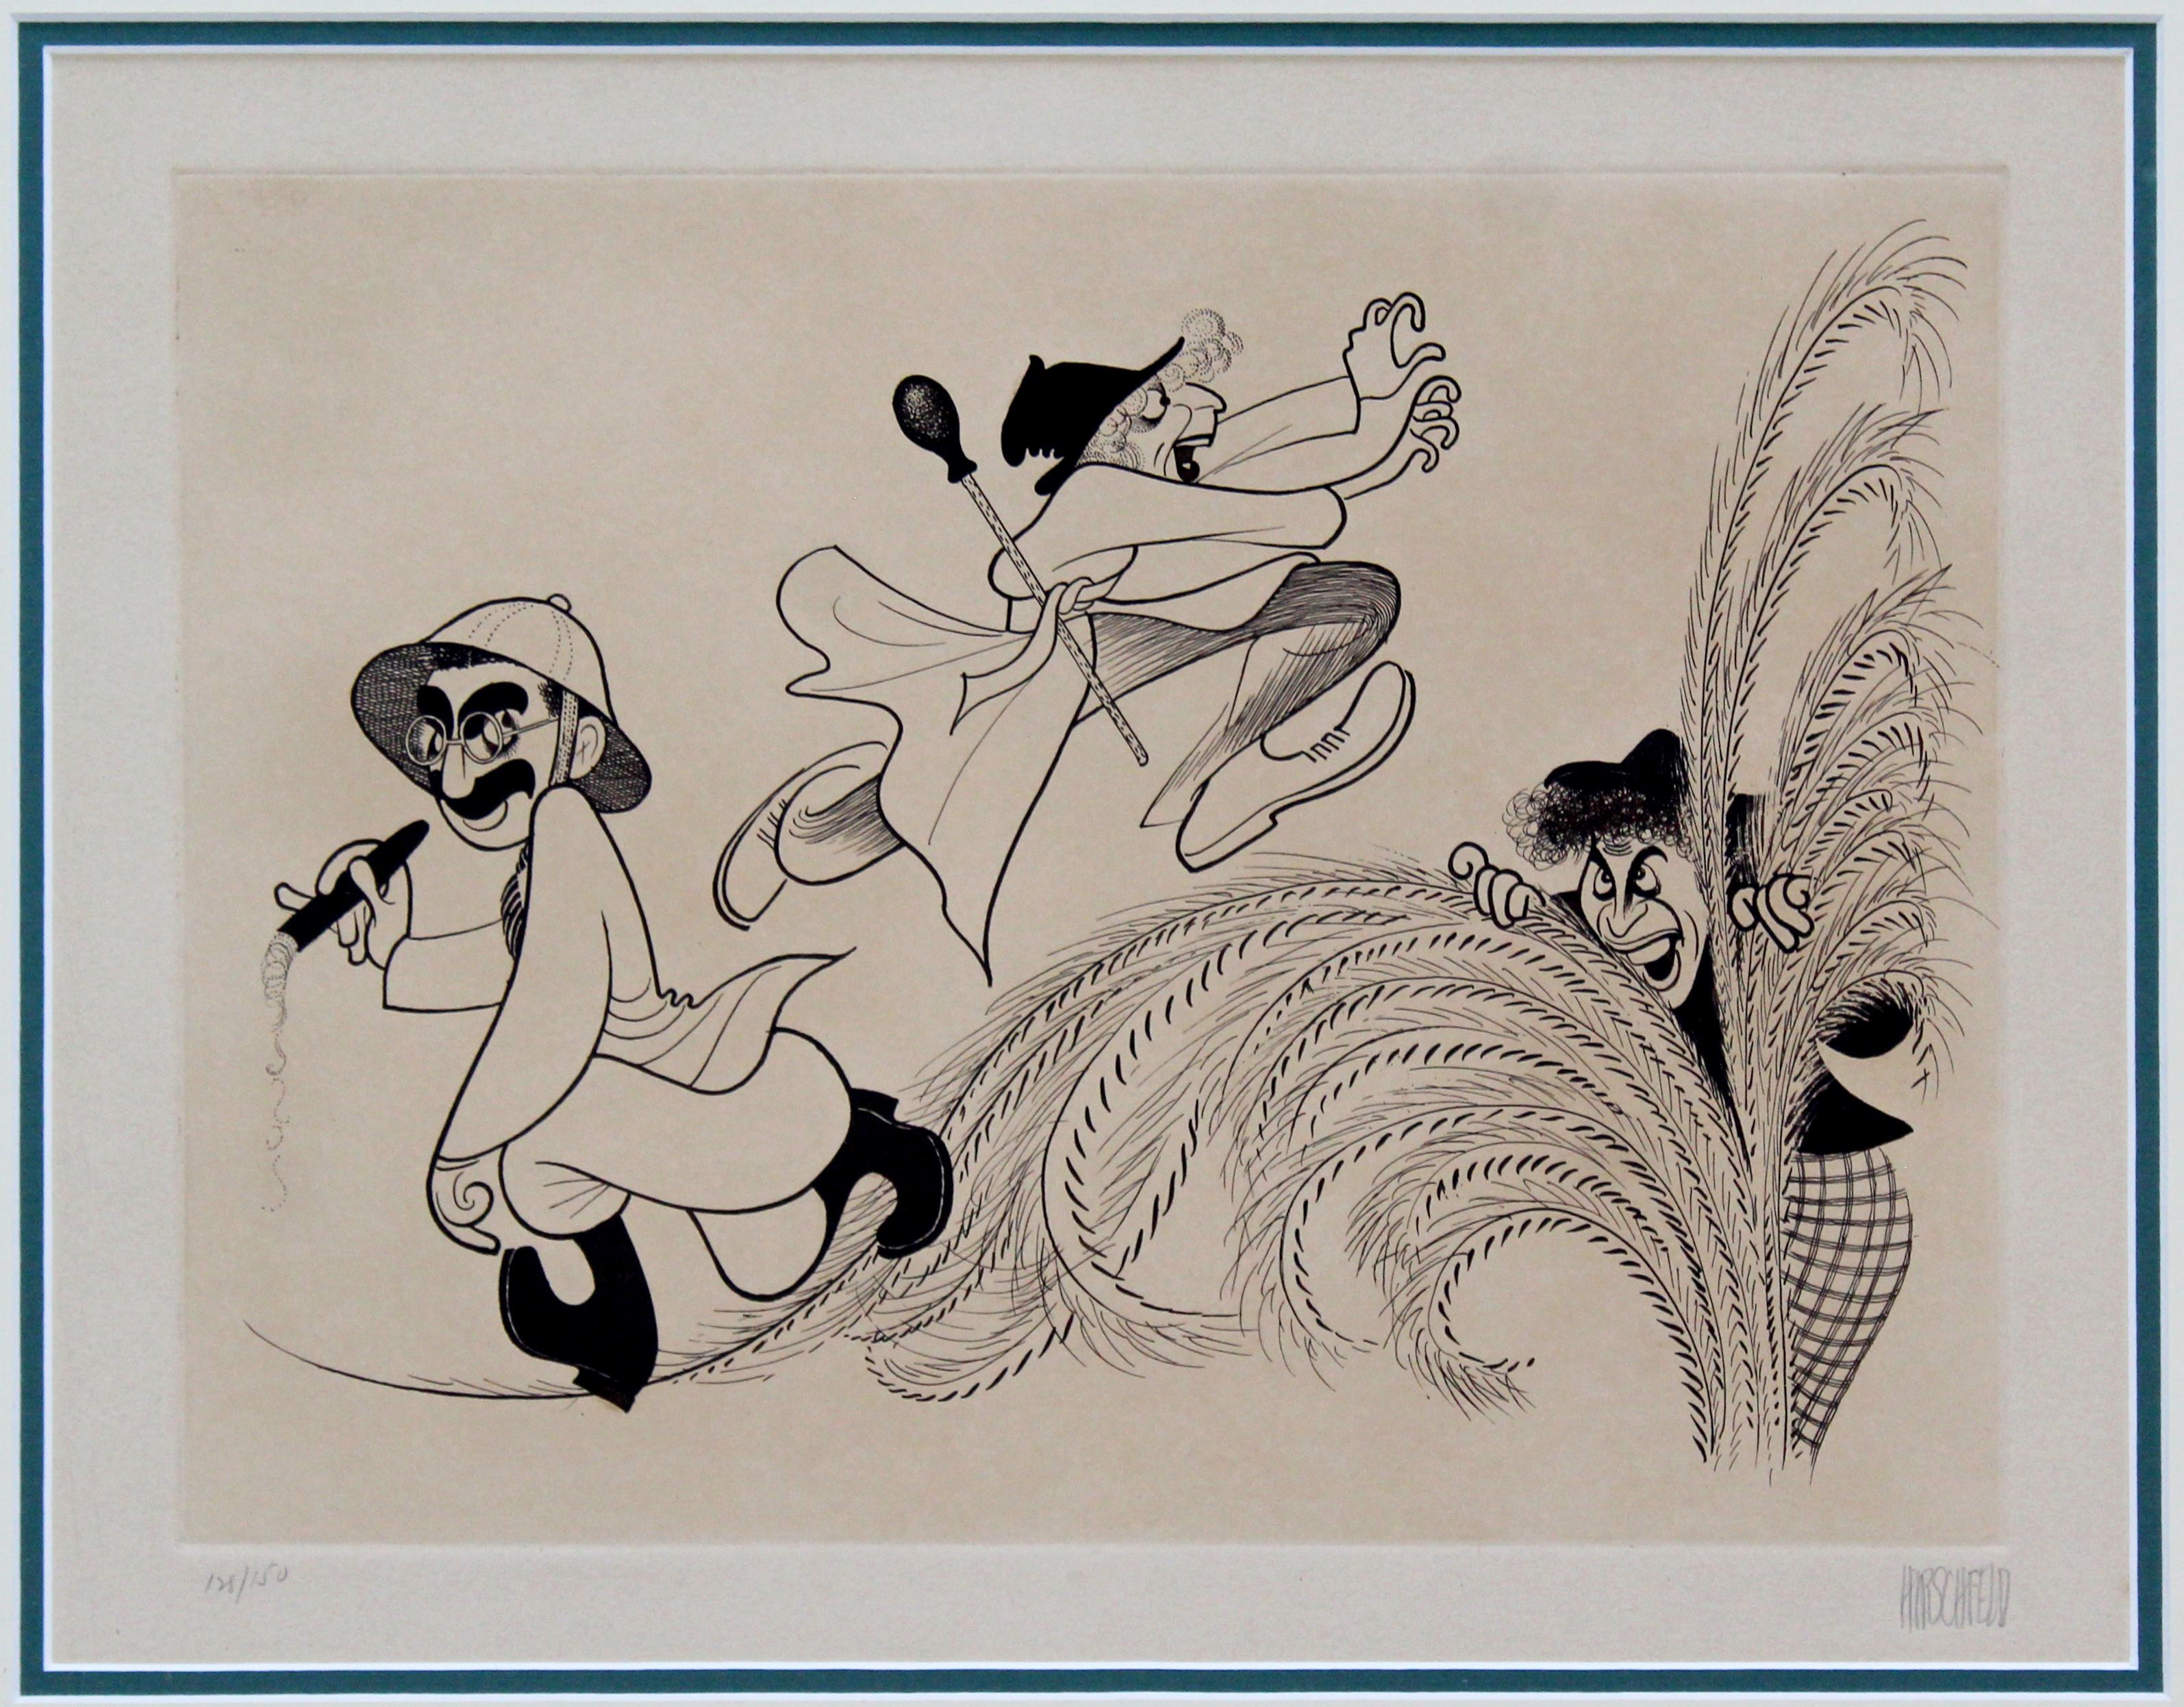 For your consideration is a playful, framed Marx Brothers lithograph, signed and numbered by Al Hirschfeld, 128/150. In excellent condition. The dimensions of the frame are 22.5